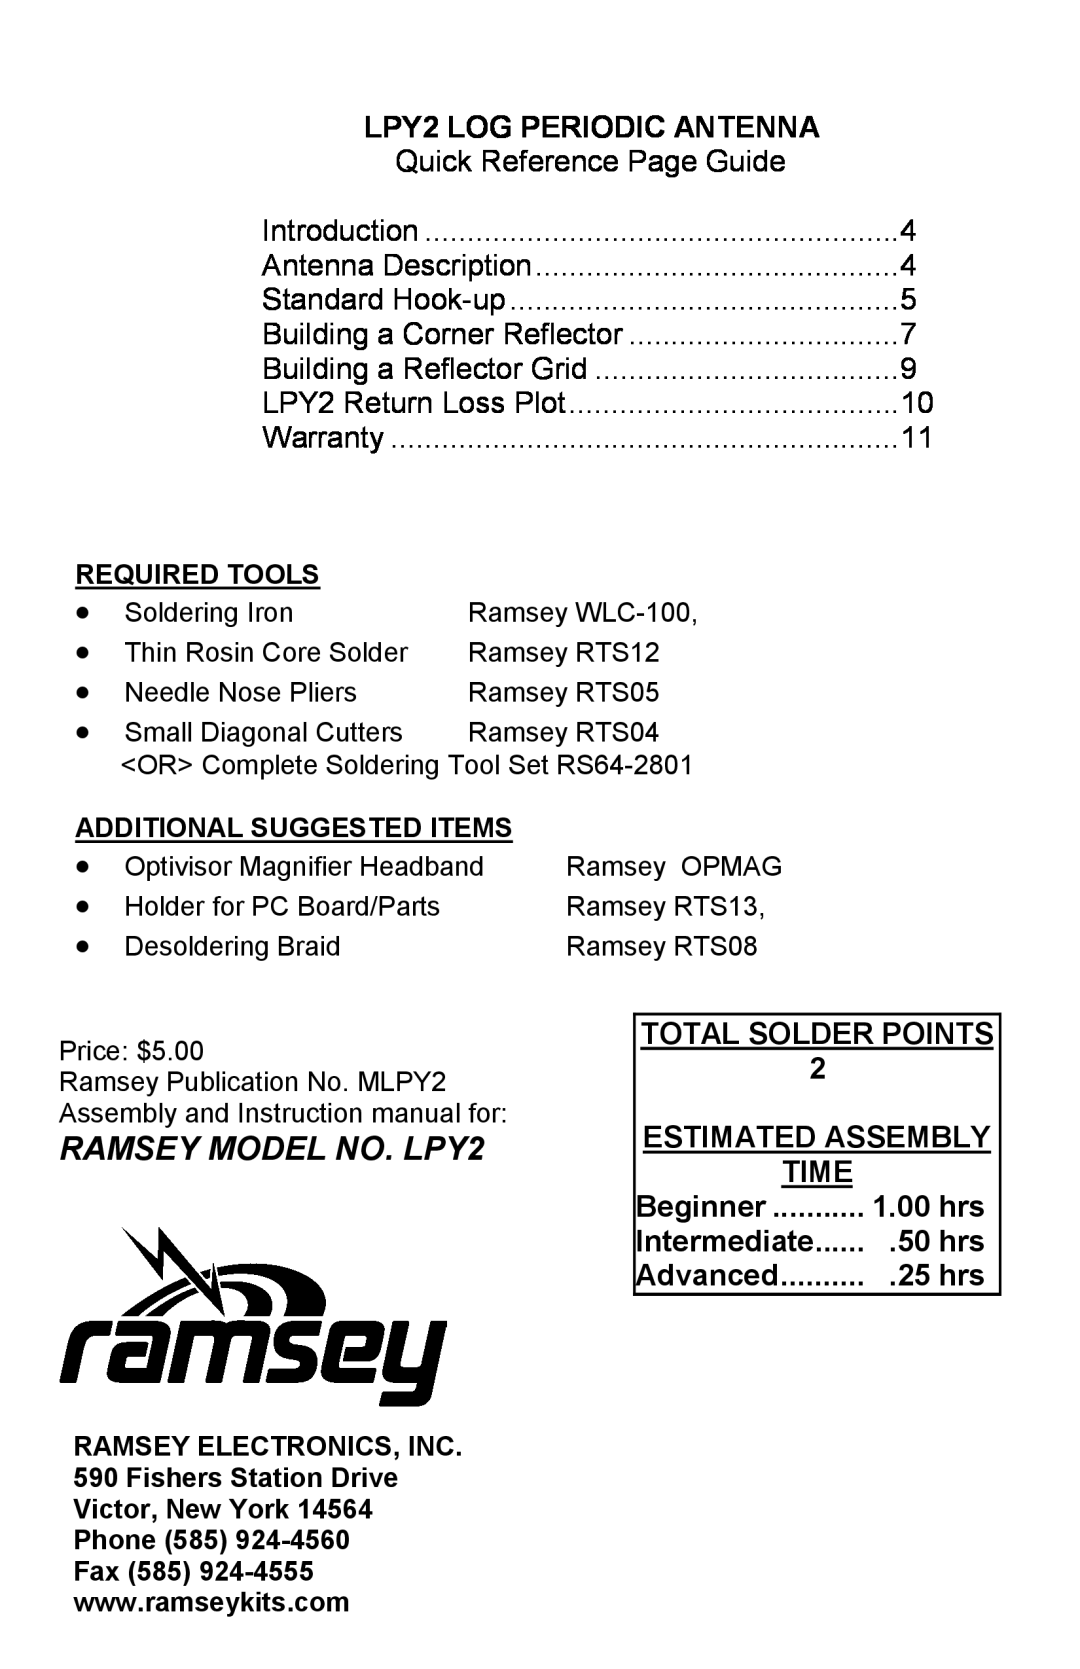 Ramsey Electronics RAMSEY MODEL NO. LPY2, LPY2 LOG PERIODIC ANTENNA, TOTAL SOLDER POINTS 2 ESTIMATED ASSEMBLY, Time 